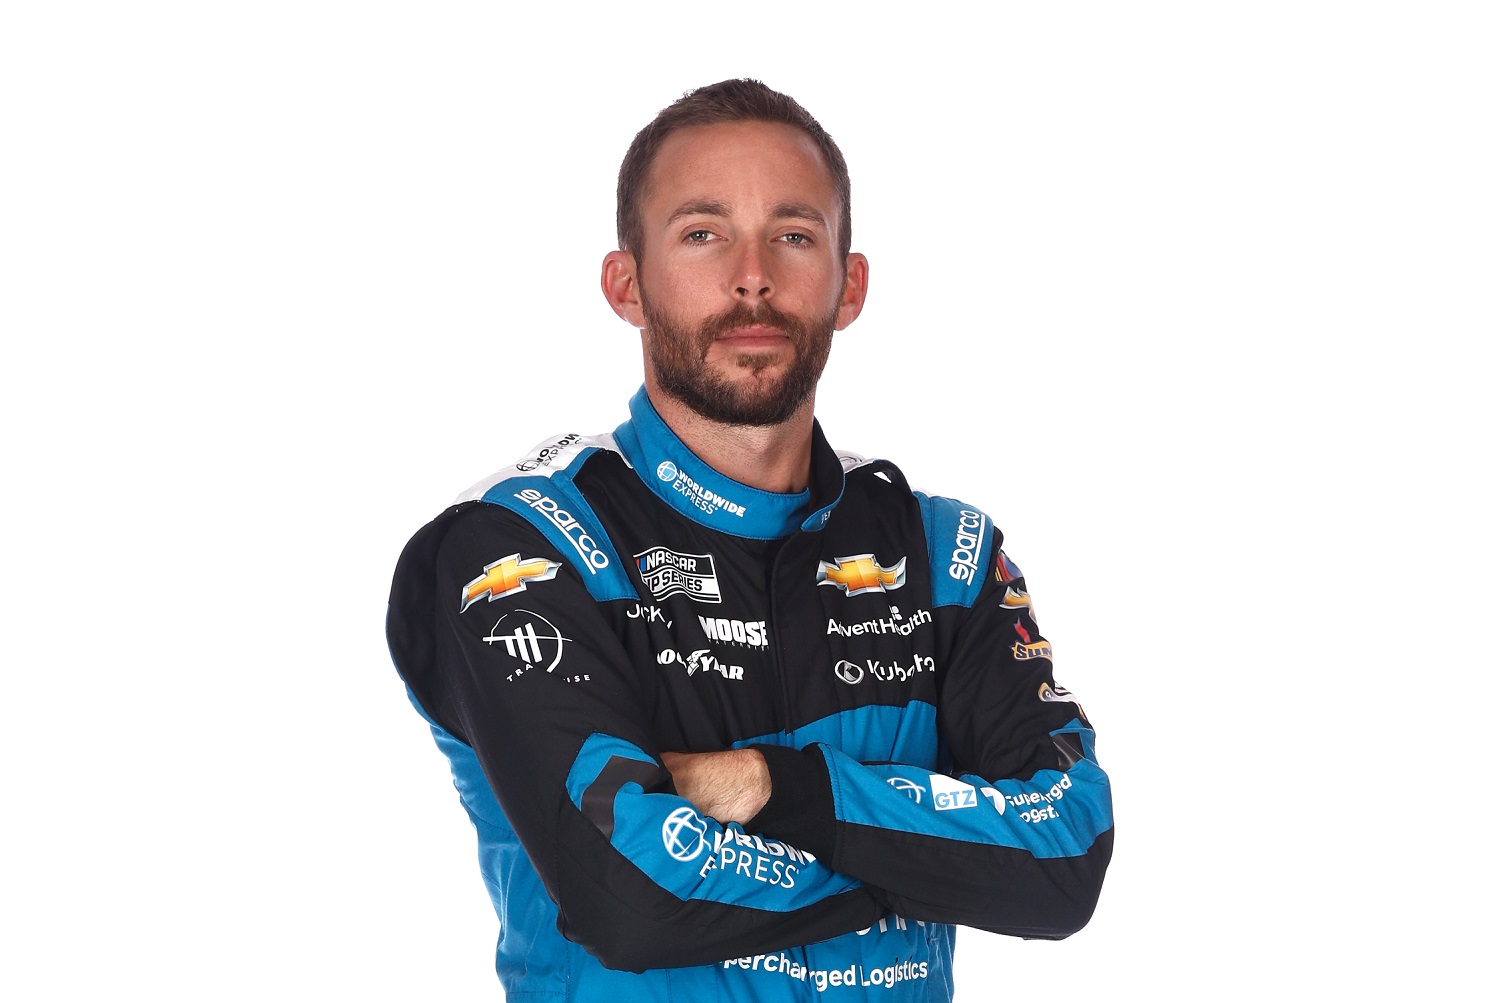 NASCAR driver Ross Chastain poses for a photo during NASCAR Production Days at Charlotte Convention Center on Jan. 18, 2023.